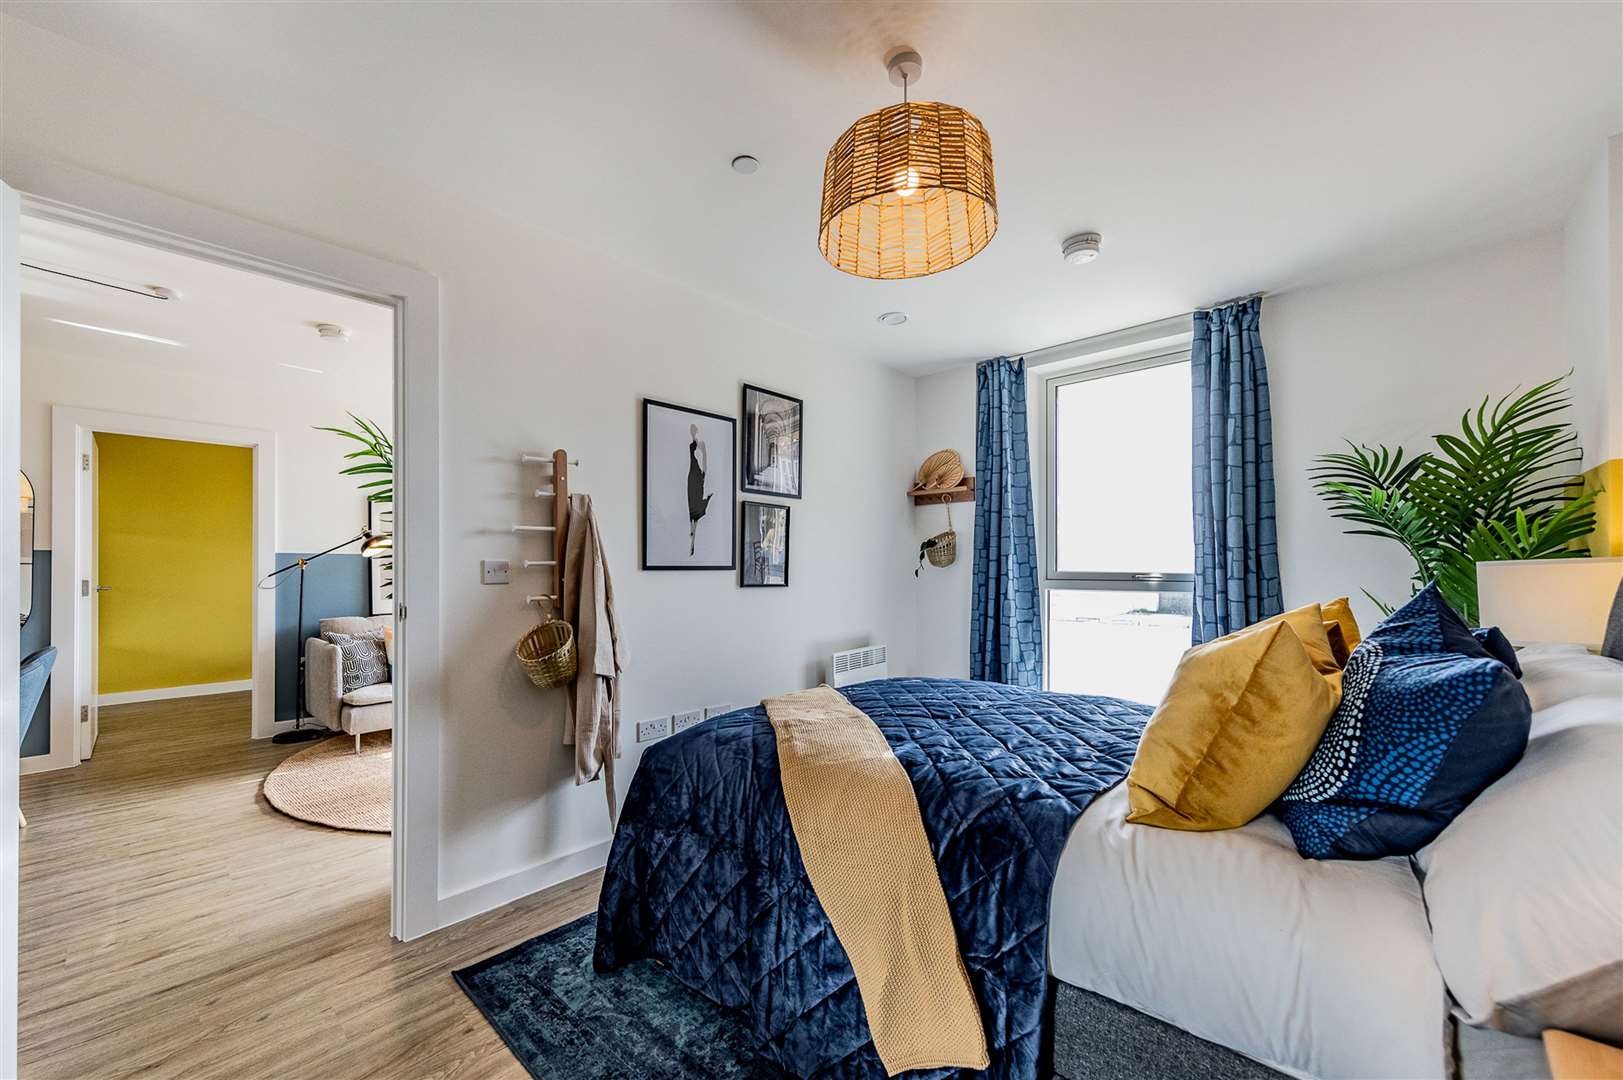 A bedroom at Cavalier Court as part of the Chatham regeneration project. Photo: Peel Waters